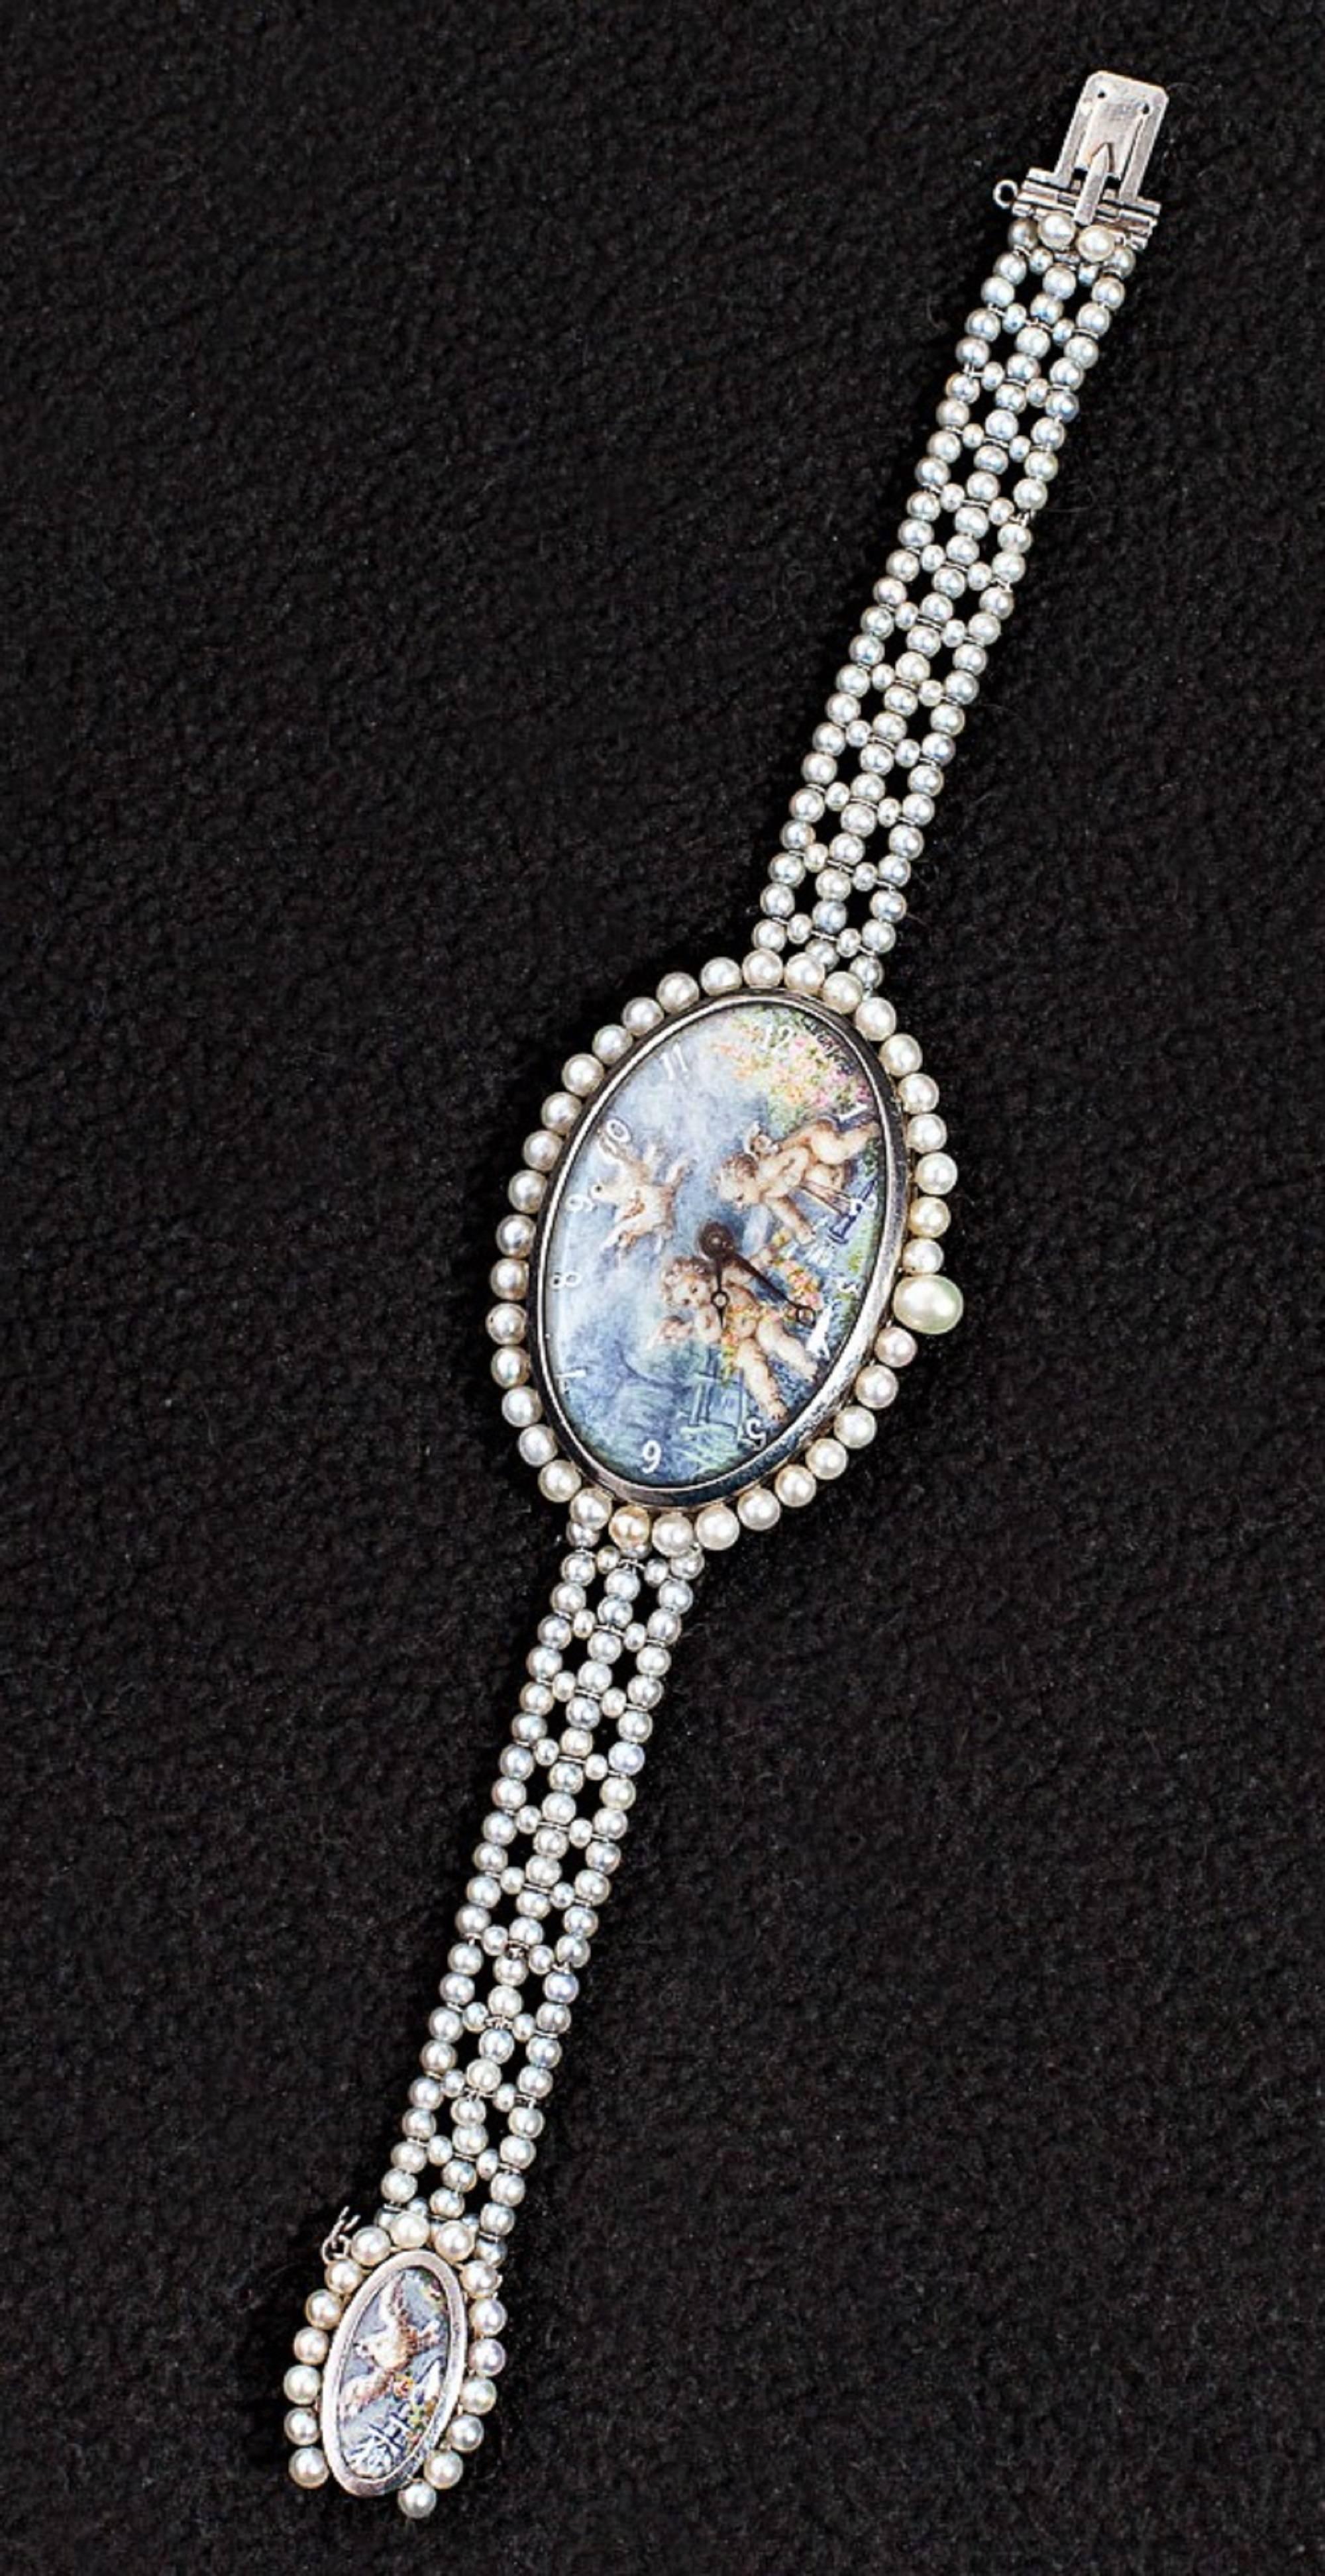 Paillet Ladies Platinum Natural Pearl Hand Painted Wristwatch In Excellent Condition For Sale In Calabasas, CA